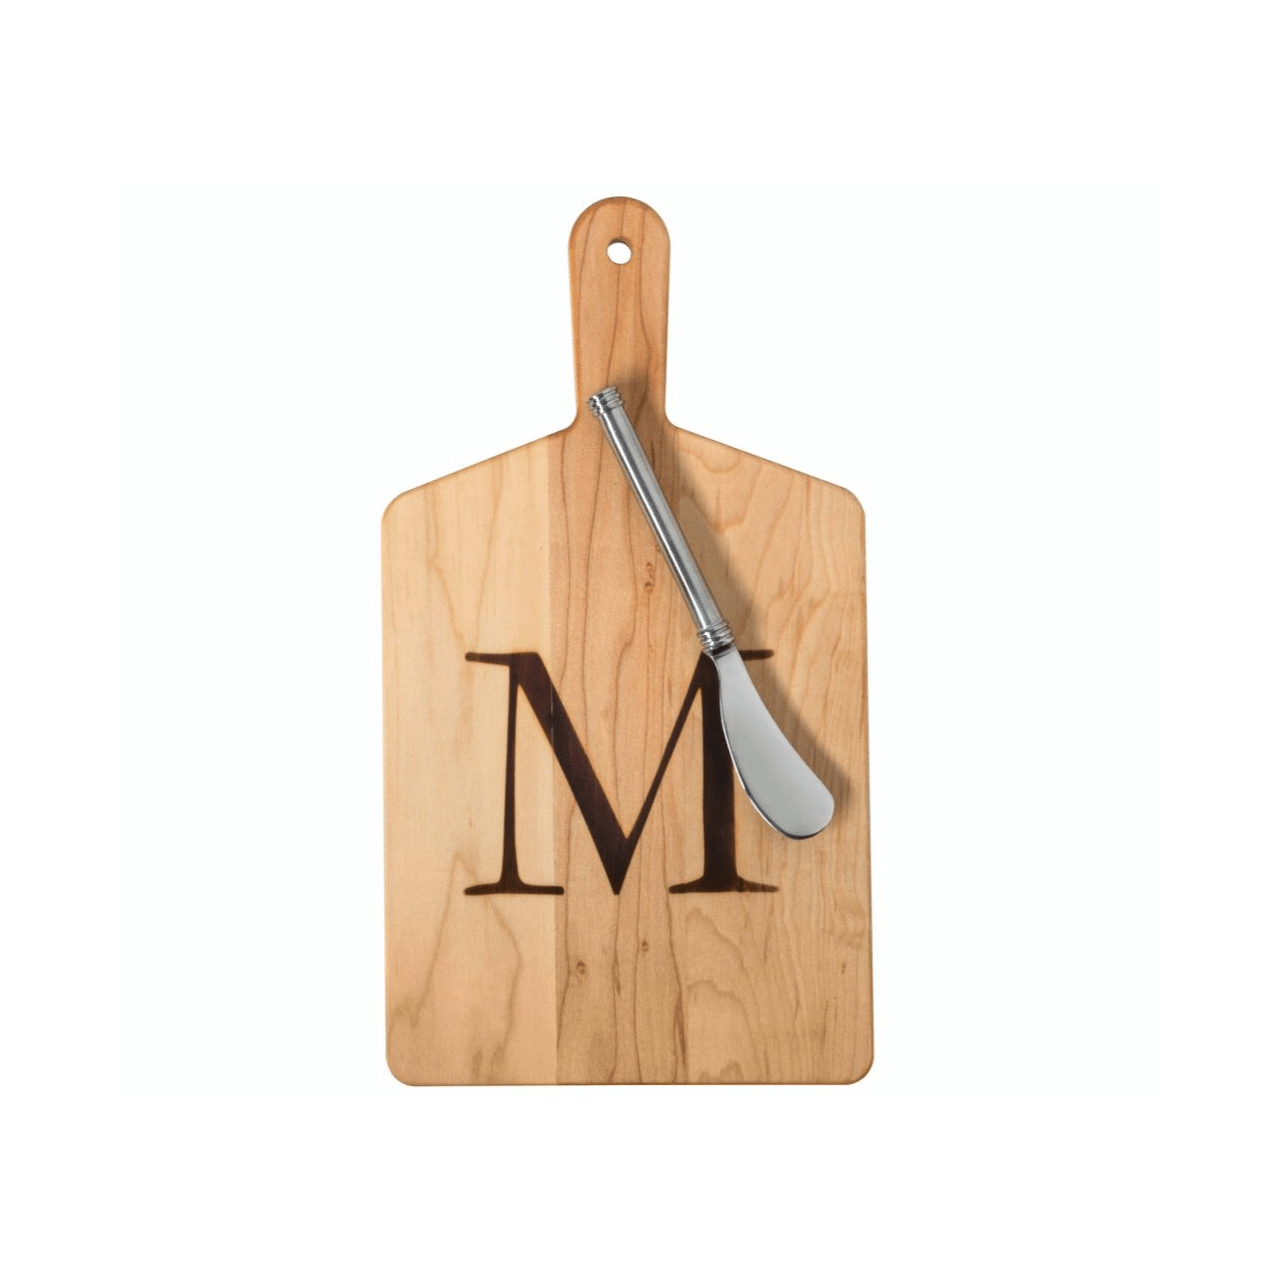 Maple Cheese Board with a Stamped C and Metal Spreader